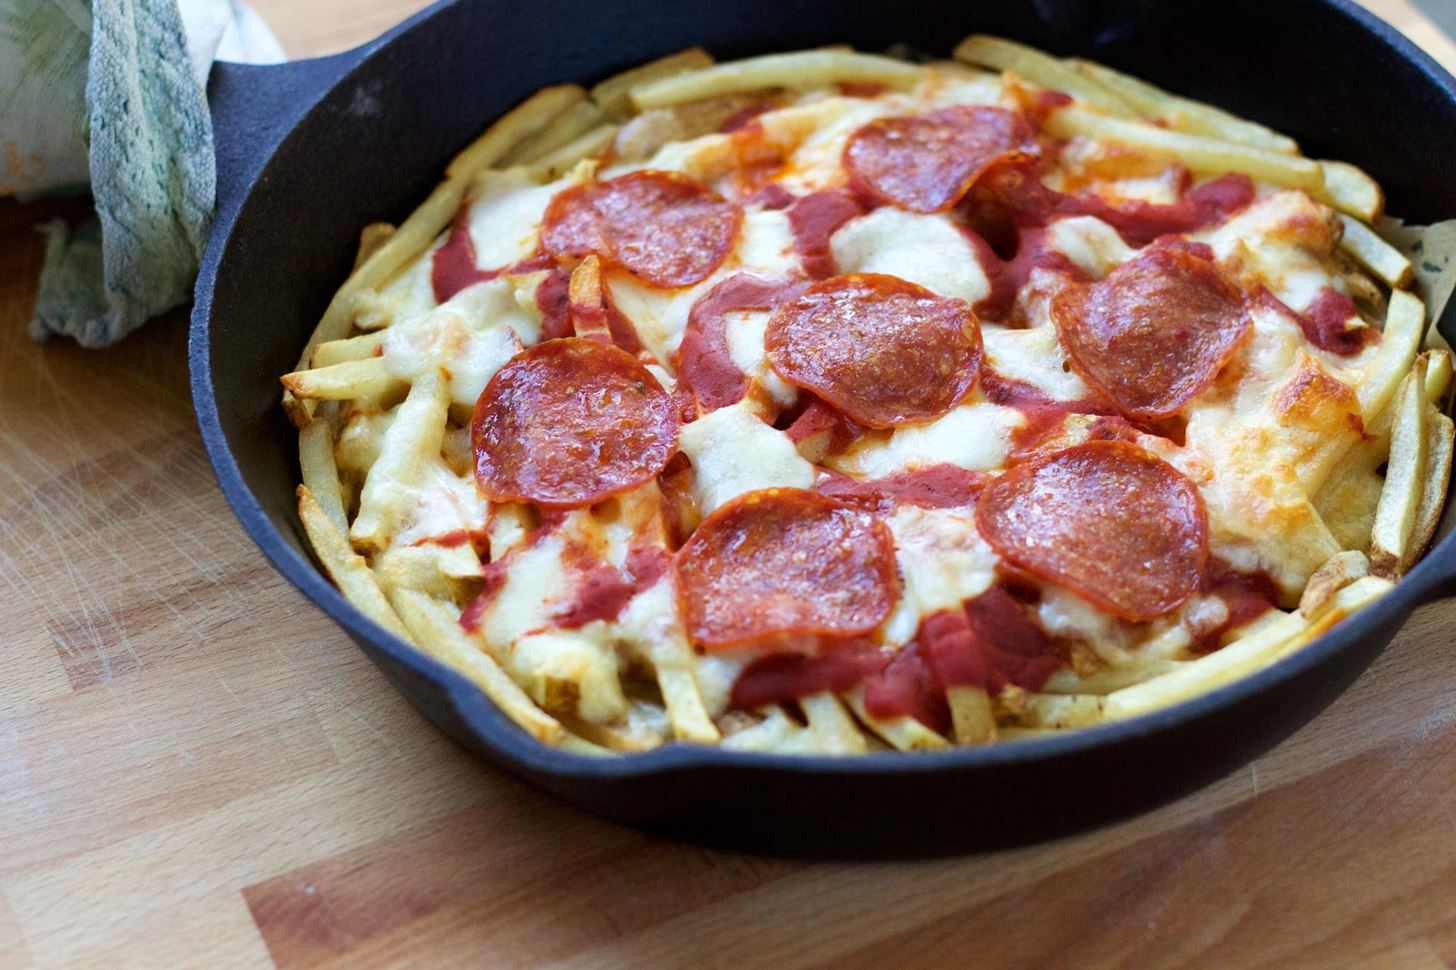 French Fry Pizza Crust—Your Drunk Self Will Thank You Later